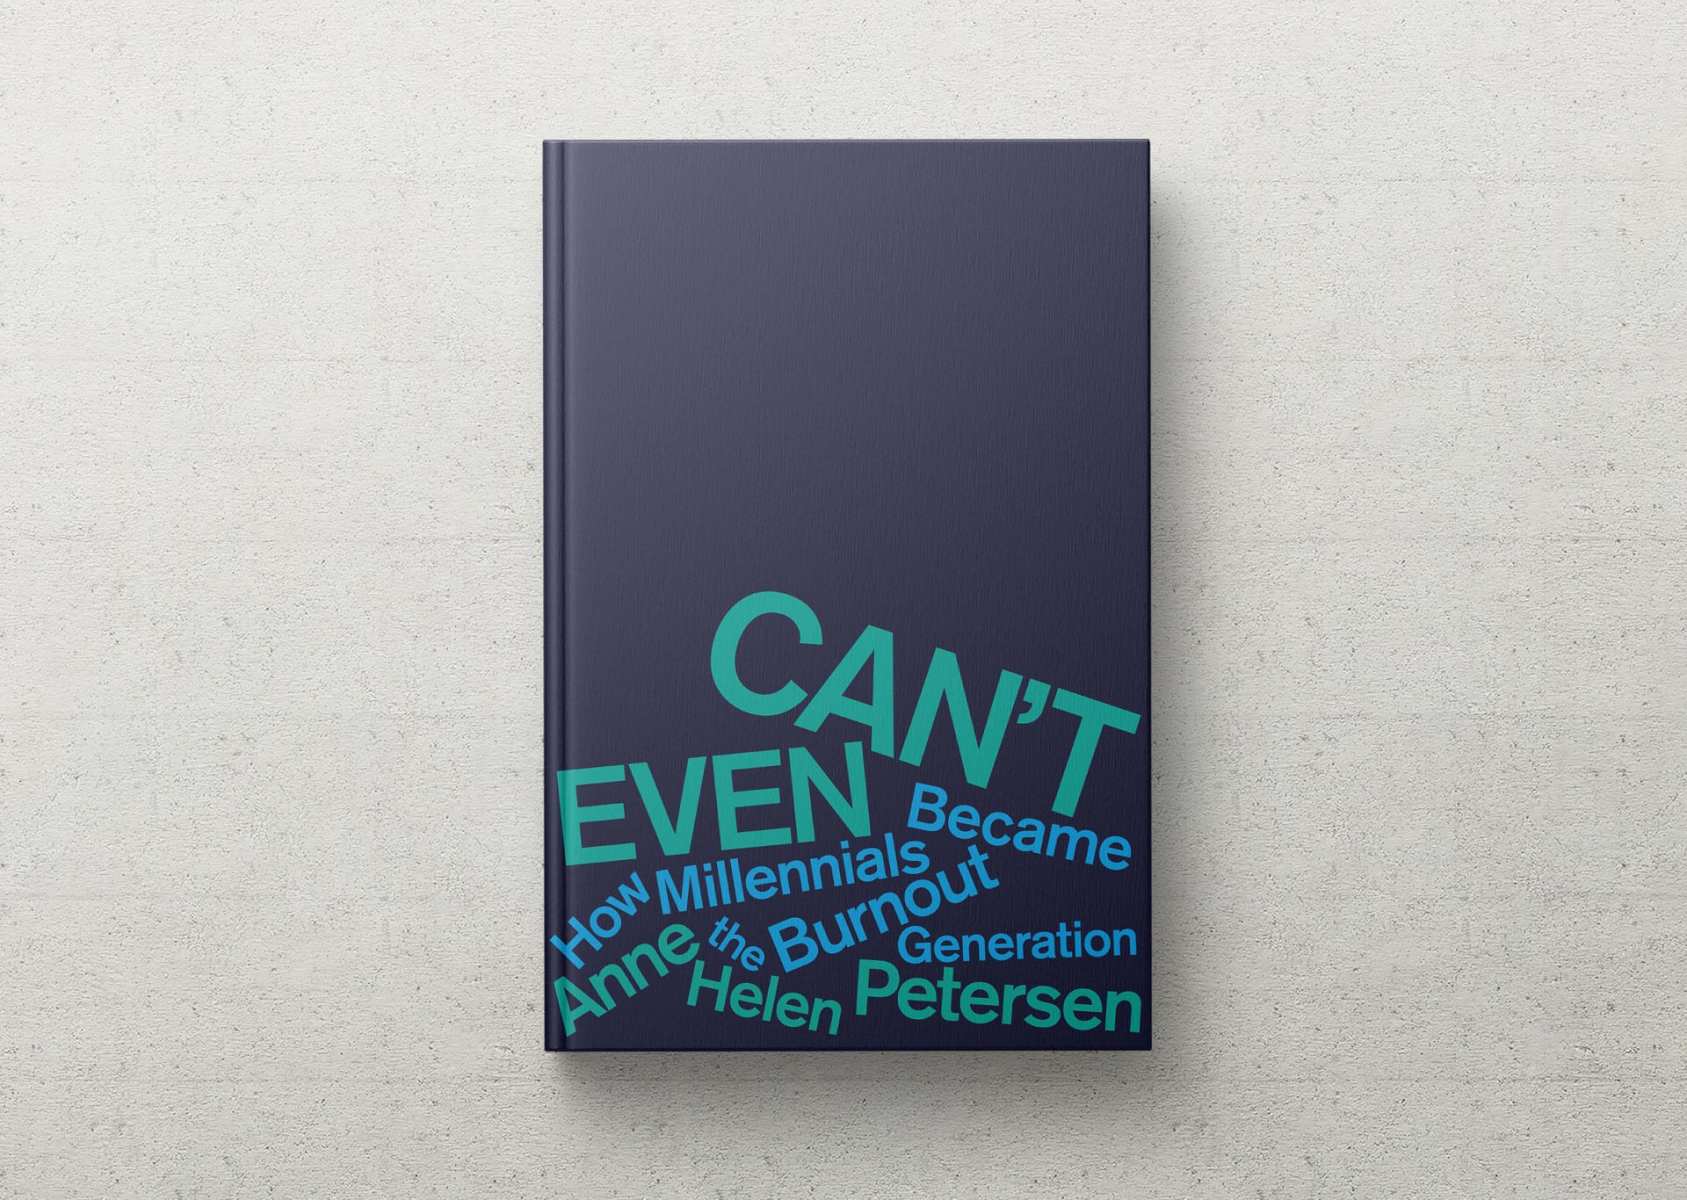 The cover of the book "Can't Even" by Anne Helen Petersen